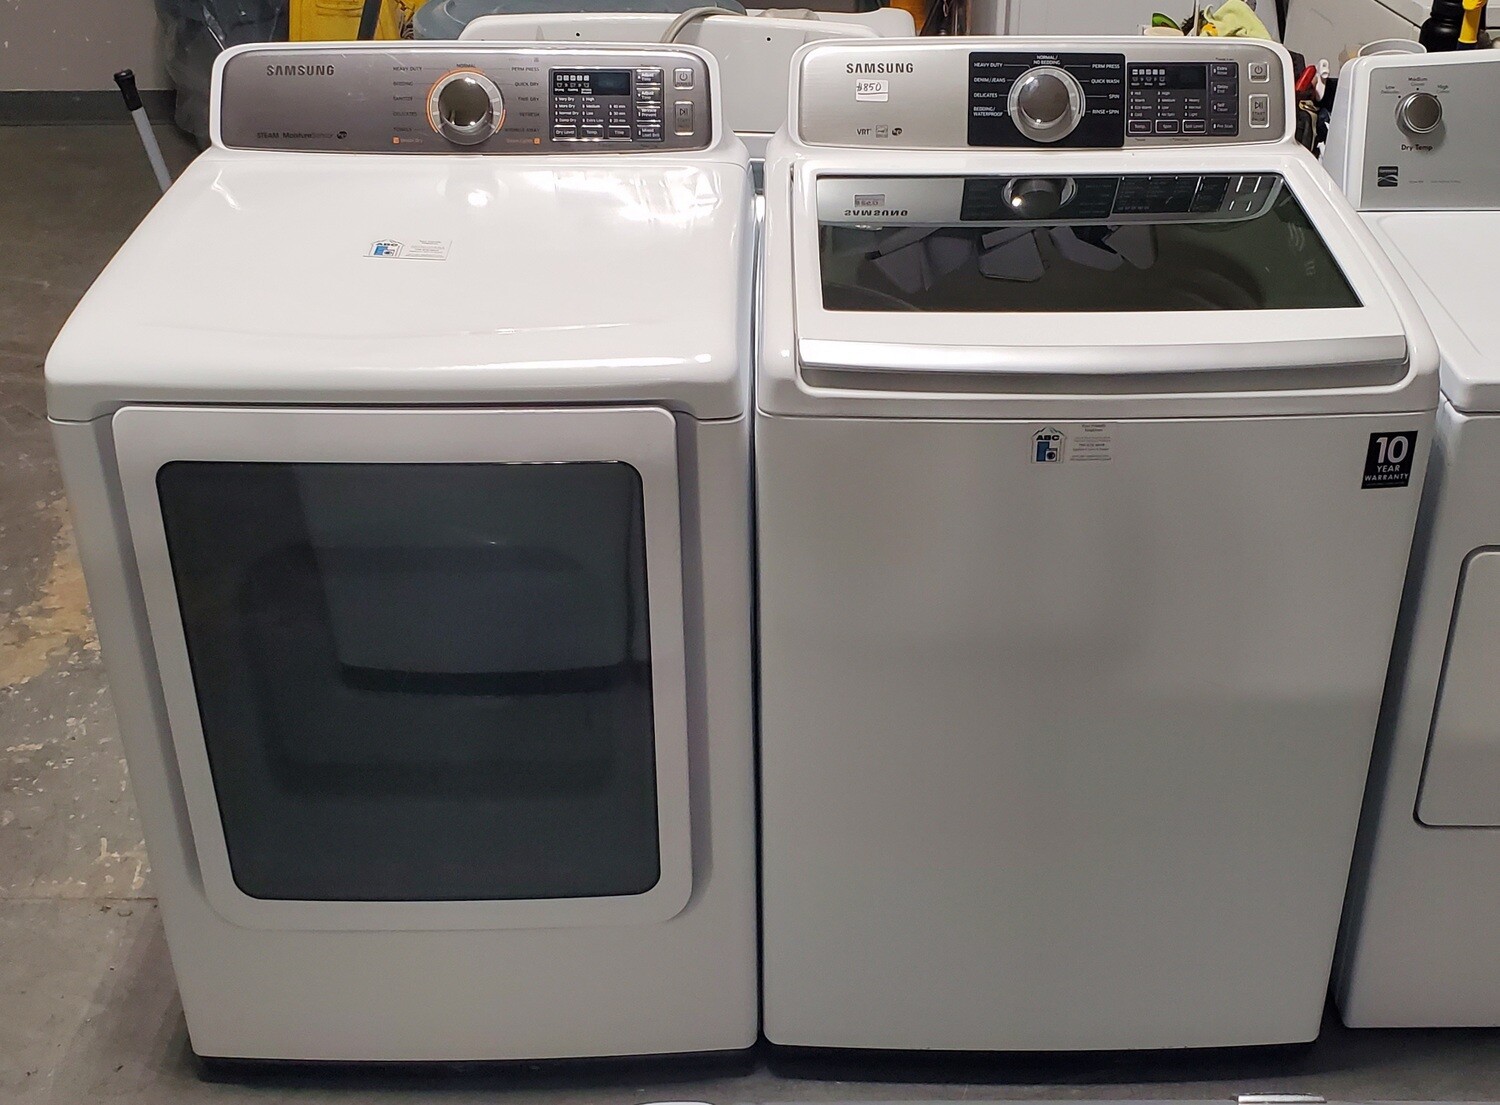 27in. Samsung Large Capacity High Efficiency Washer & Matching Electric Dryer